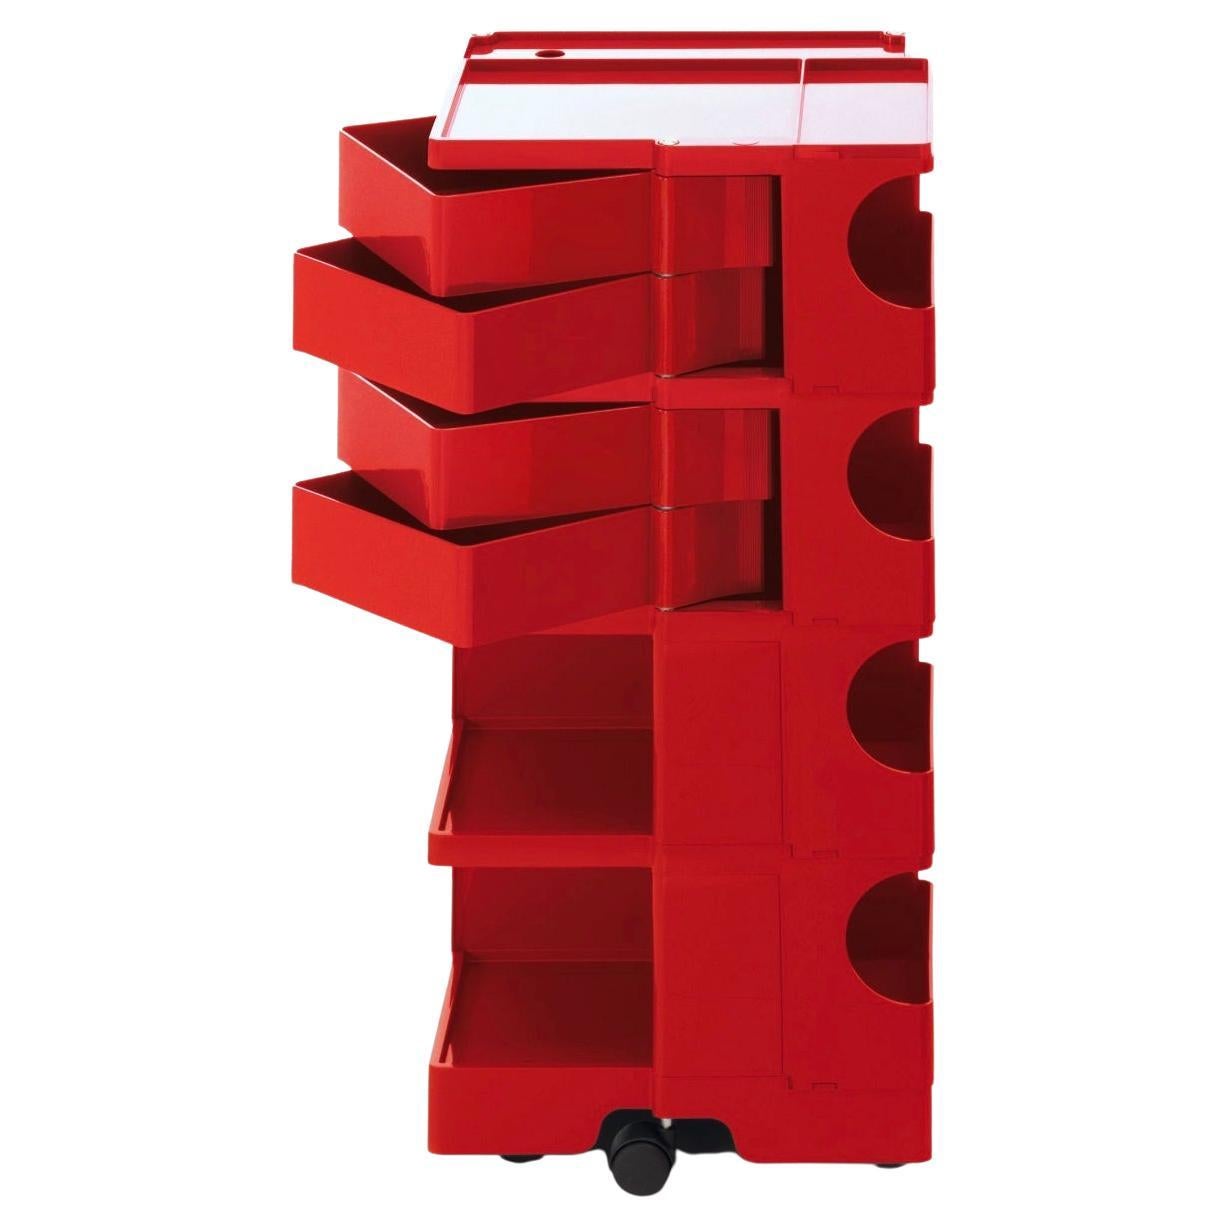 Joe Colombo 'Boby' Trolley 1970 Size L with 4 Drawers in Red for B-Line For Sale